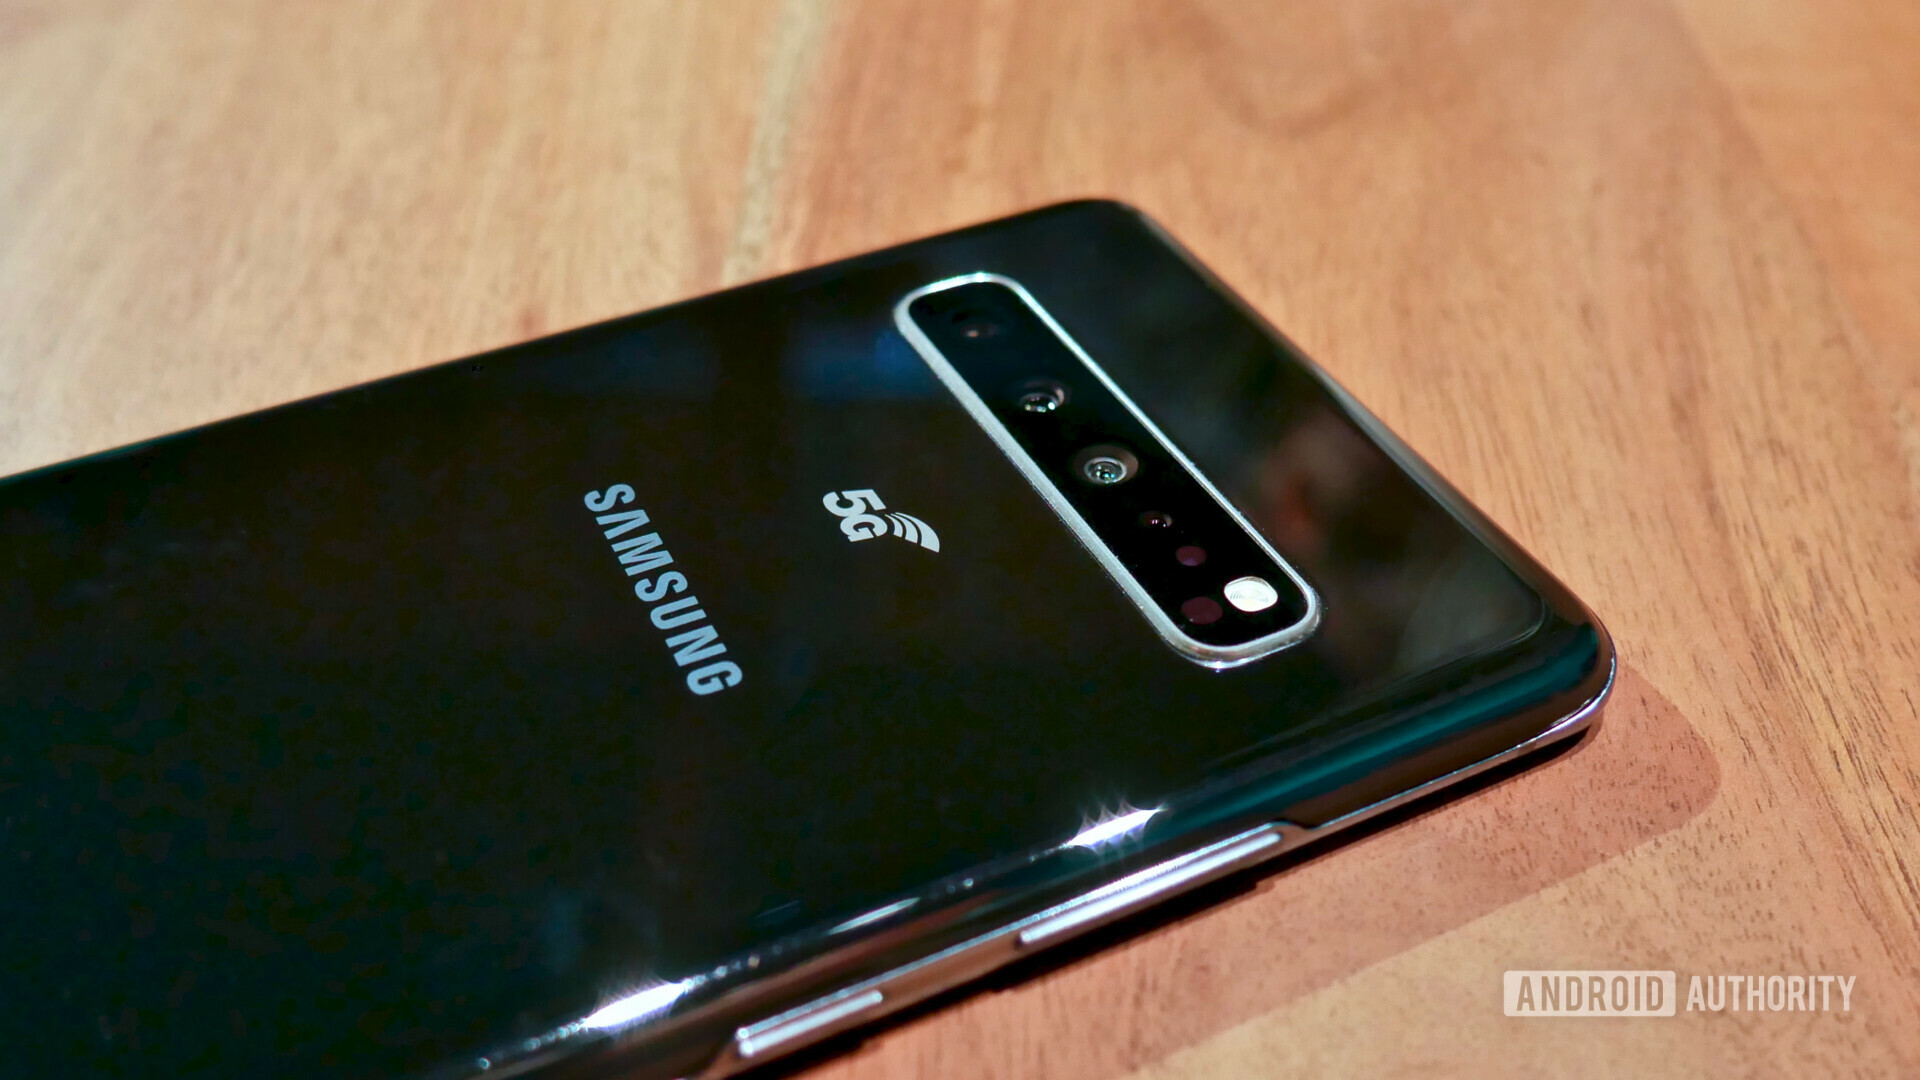 The Samsung Galaxy S11 5G looks set to succeed the Galaxy S10 5G in the coming months.